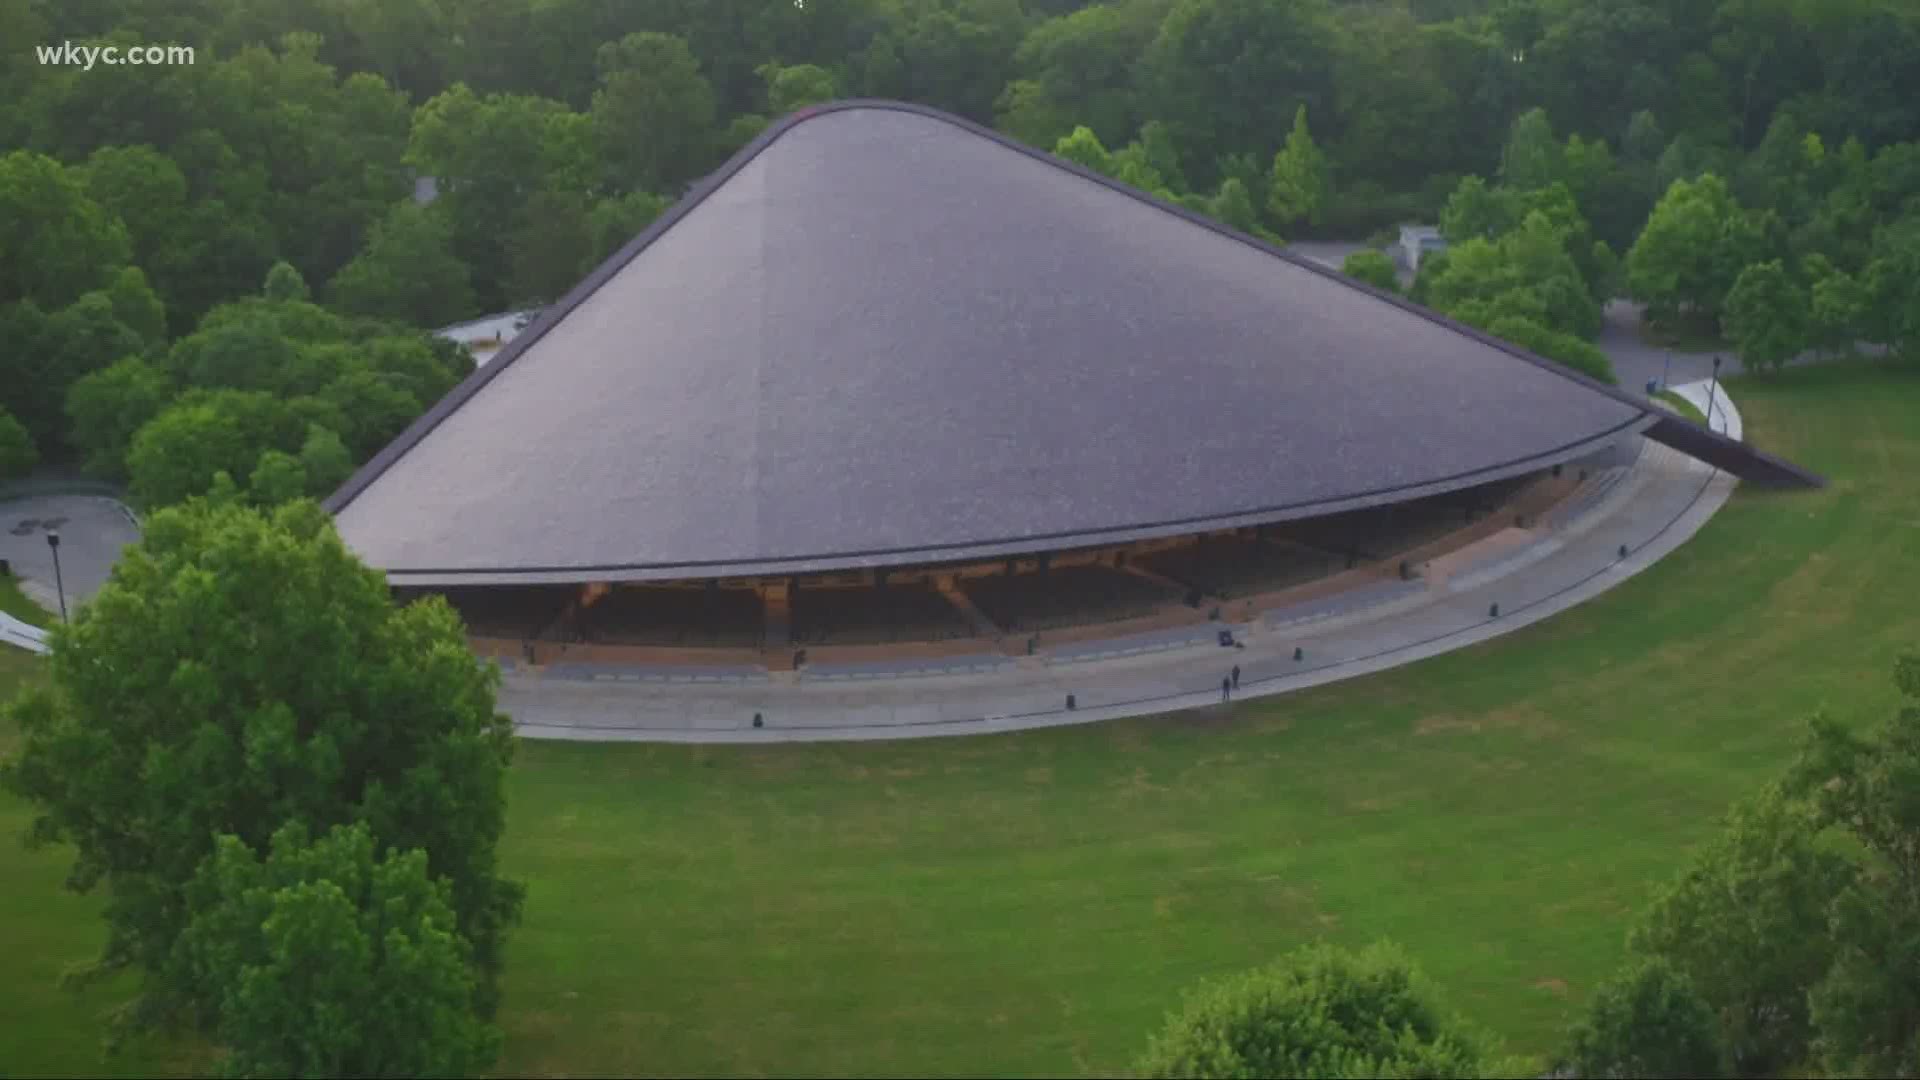 The 2020 Lawn Pass at Blossom Music Center has been canceled as many concerts have been scrapped or postponed due to ongoing coronavirus concerns.